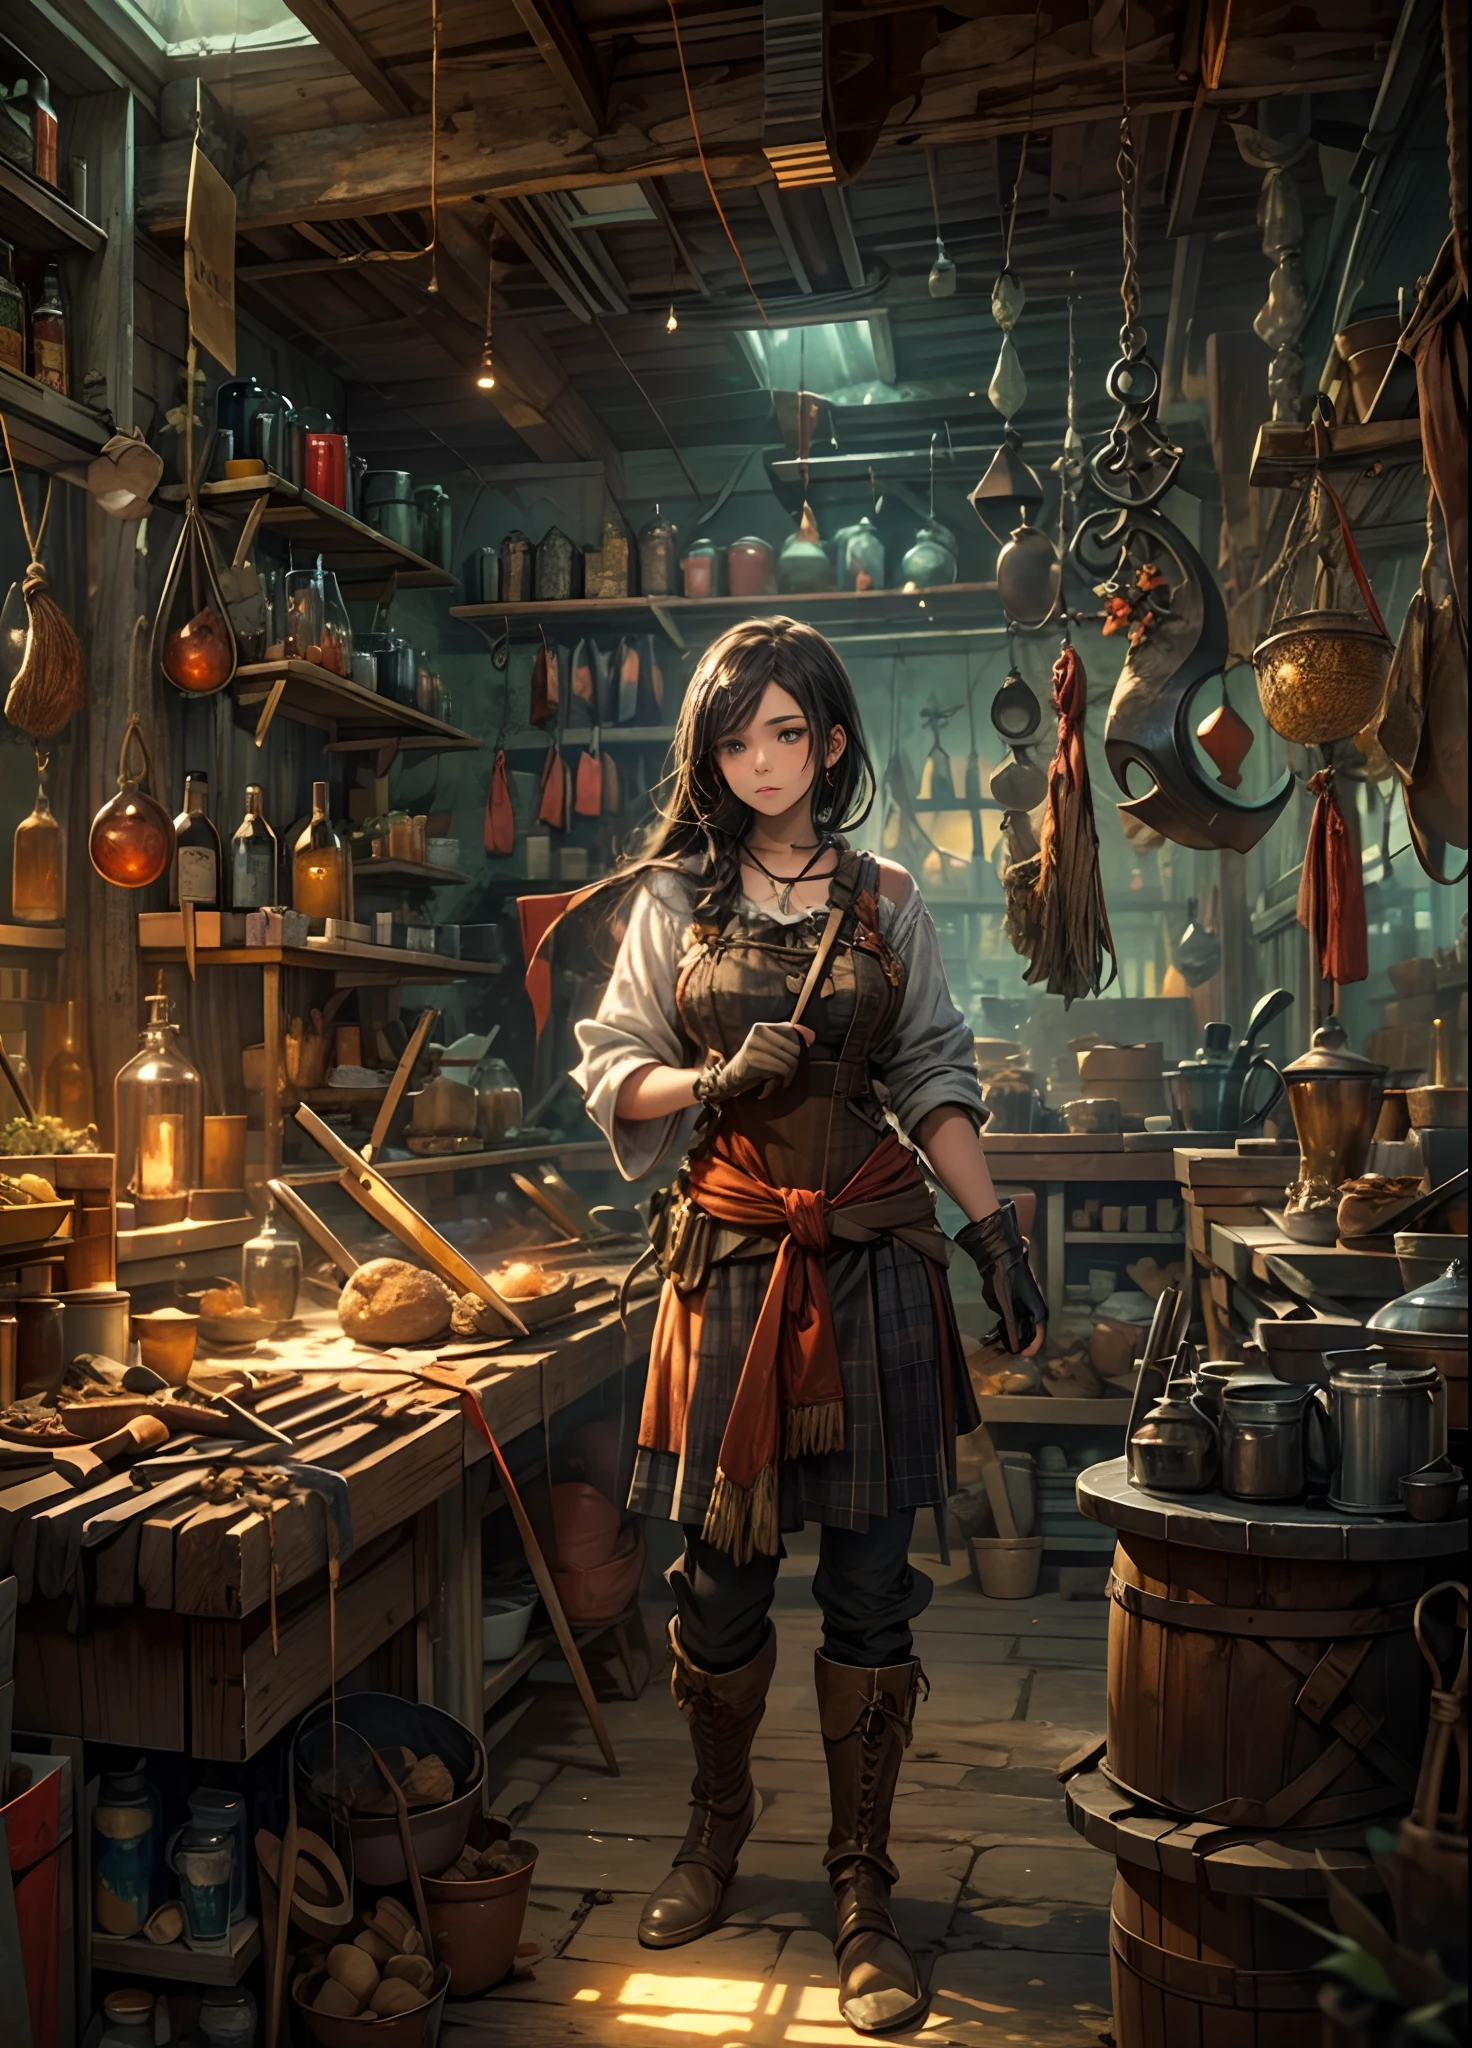 masterpiece, concept art, medium shot, panoramic, blacksmith weapon store interior, weapon variety hanged in wall, mythical, fantasy theme, 1girl as a blacksmith, storekeeper, behind counter, blacksmith outfit, sexy, cute, cozy, atmospheric, (epic composition, epic proportion, highly detailed), HD, vibrant color,